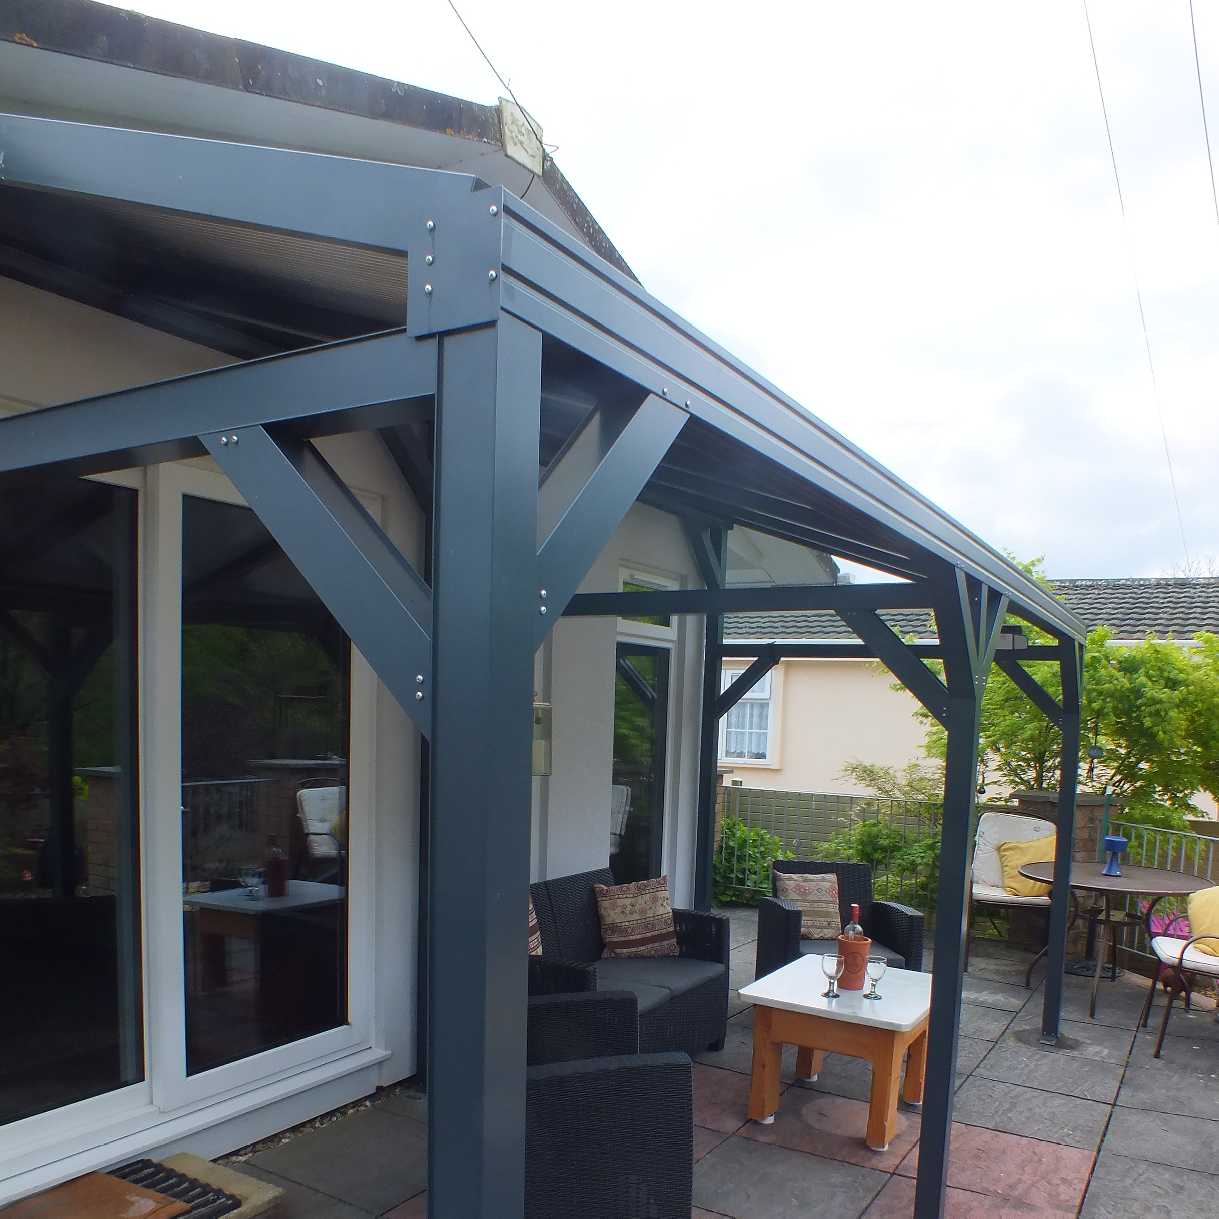 Affordable Omega Smart Free-Standing, Anthracite Grey MonoPitch Roof Canopy with 16mm Polycarbonate Glazing - 7.4m (W) x 3.0m (P), (8) Supporting Posts